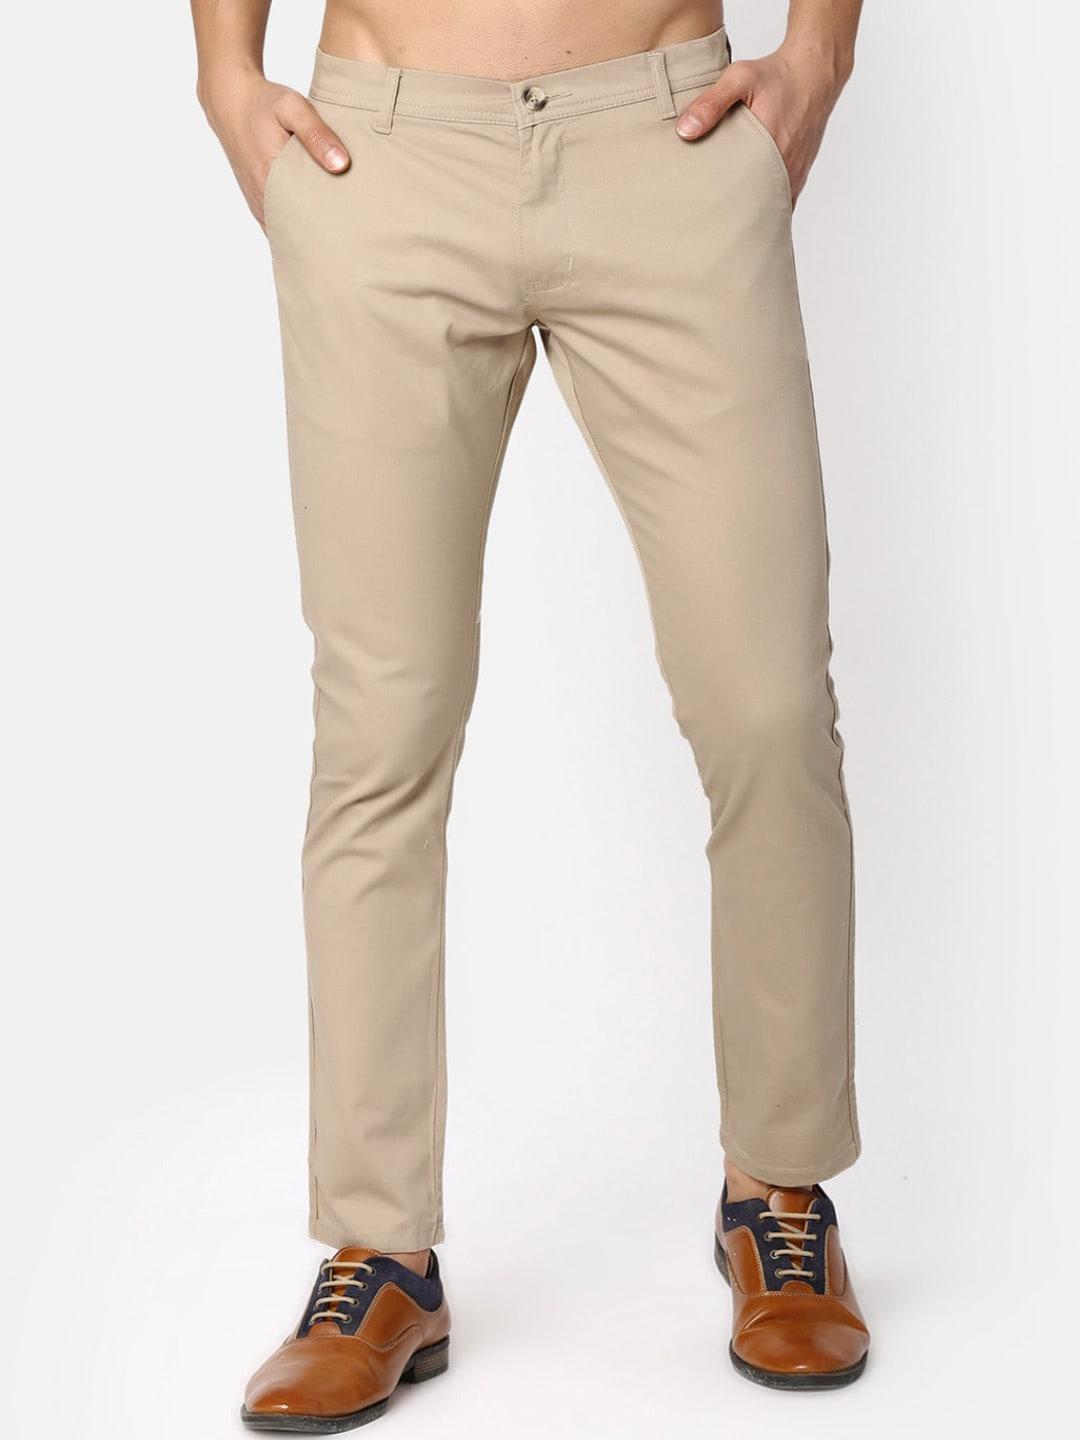 V-Mart Men Cotton Chinos Trousers